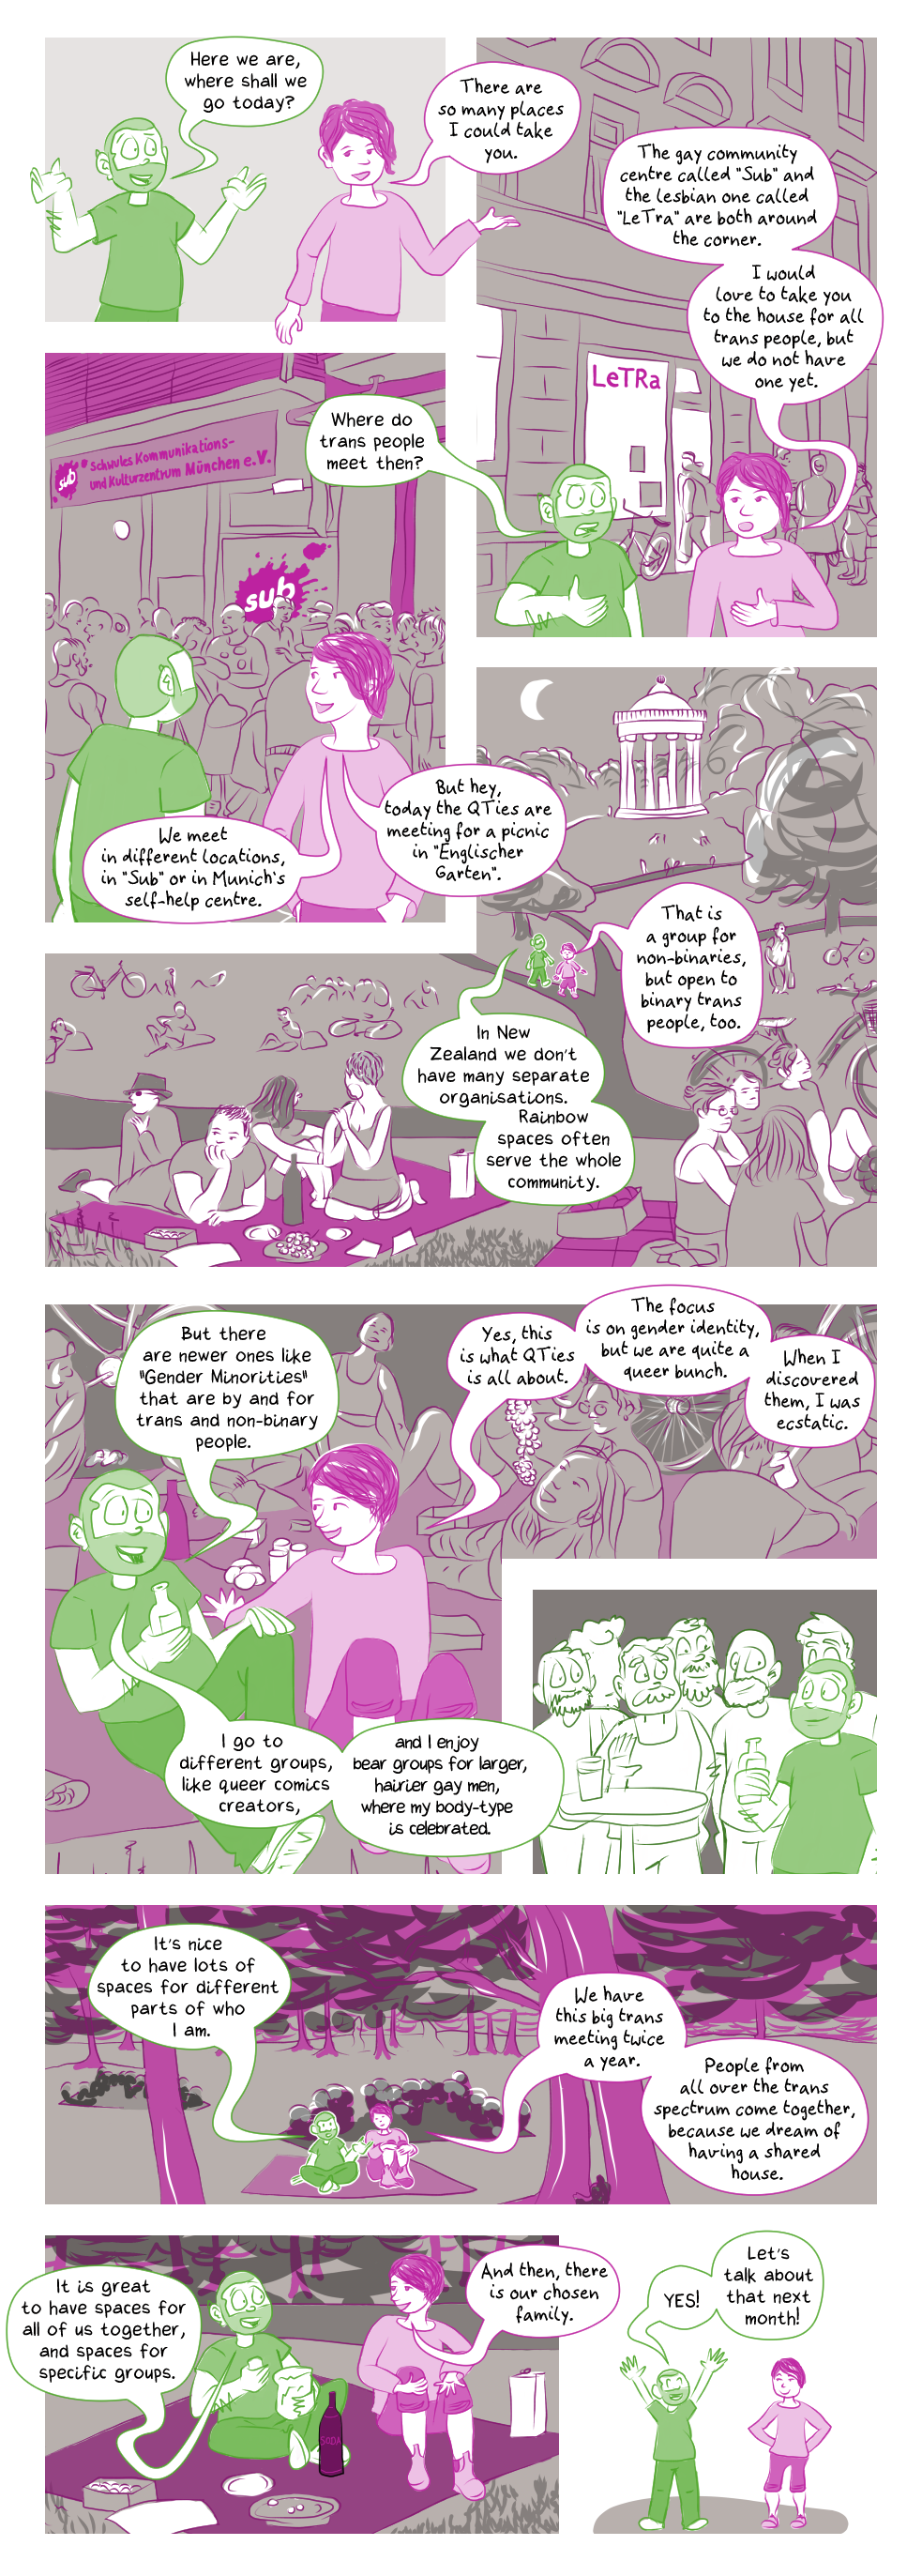 visual comic: Queer Comic Conversation - September: Spaces, scroll down for text-based comic (after annotations)